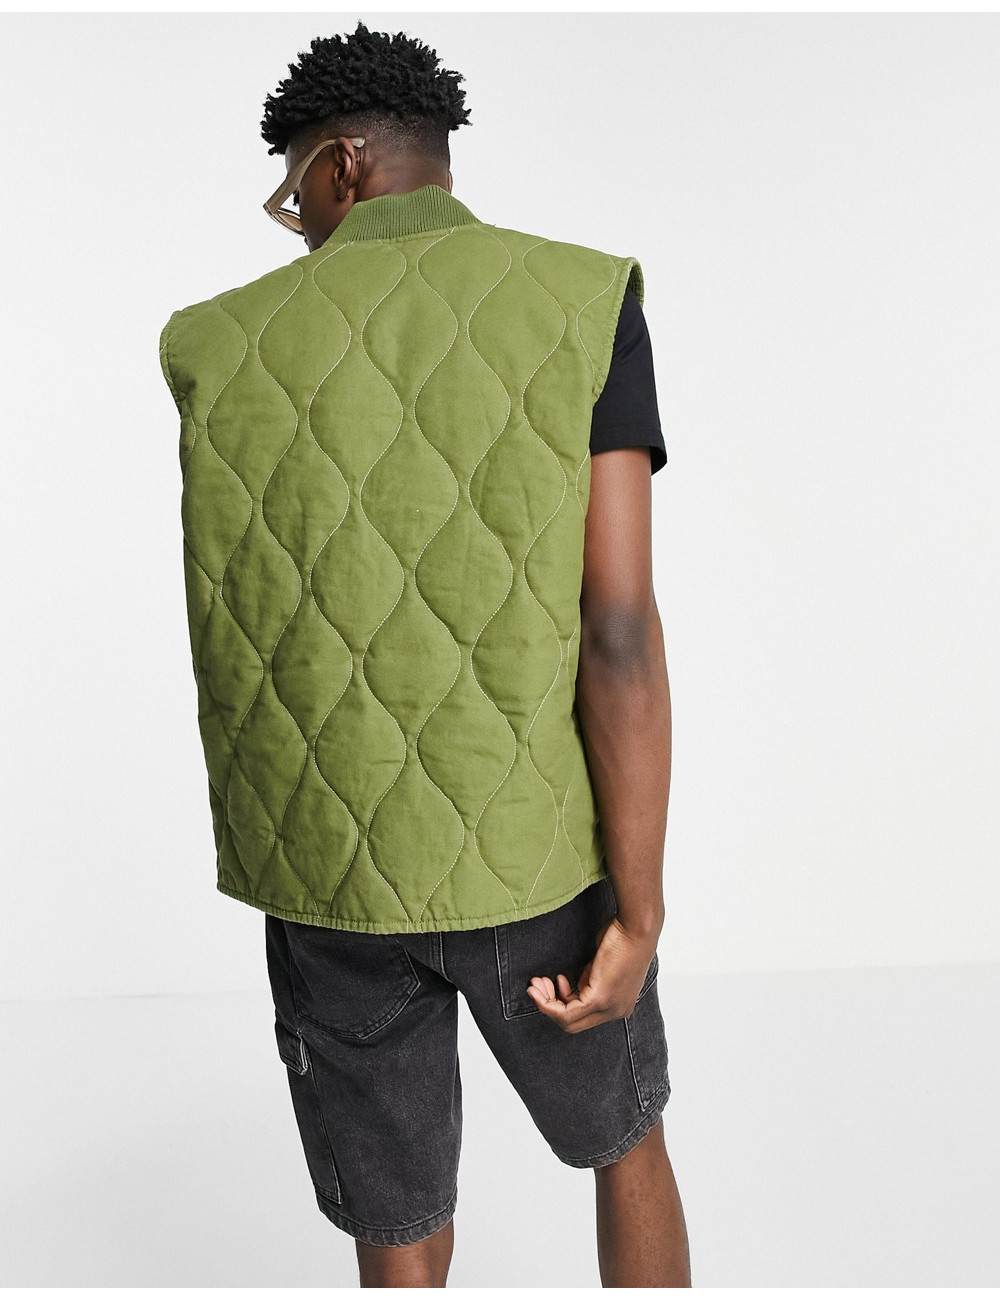 ASOS Actual quilted gilet...